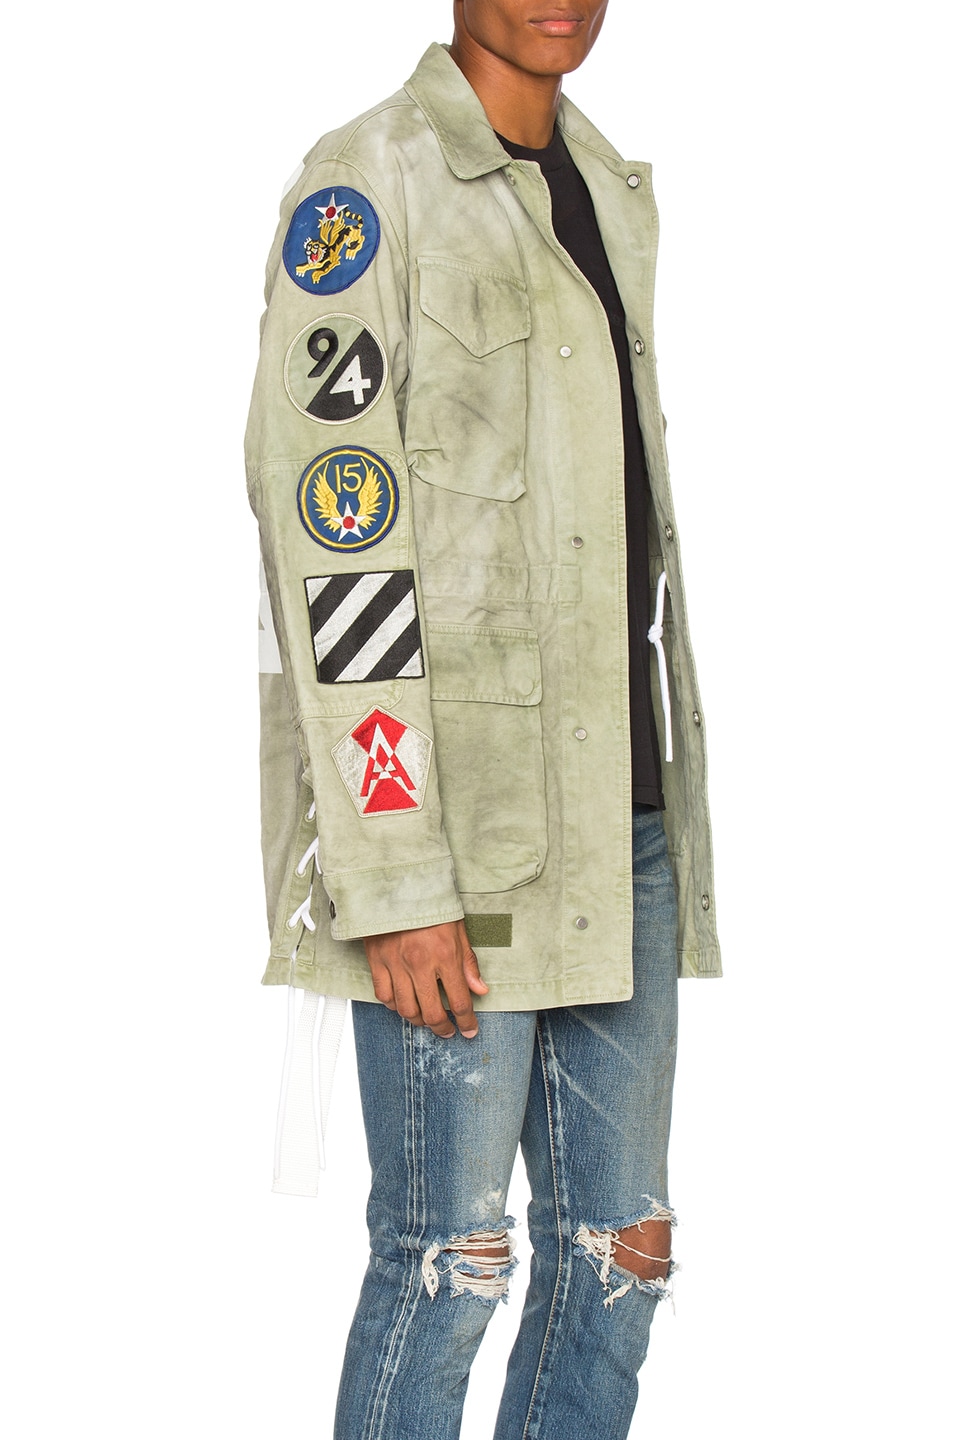 OFF-WHITE Patches Field Jacket in Military Green | FWRD